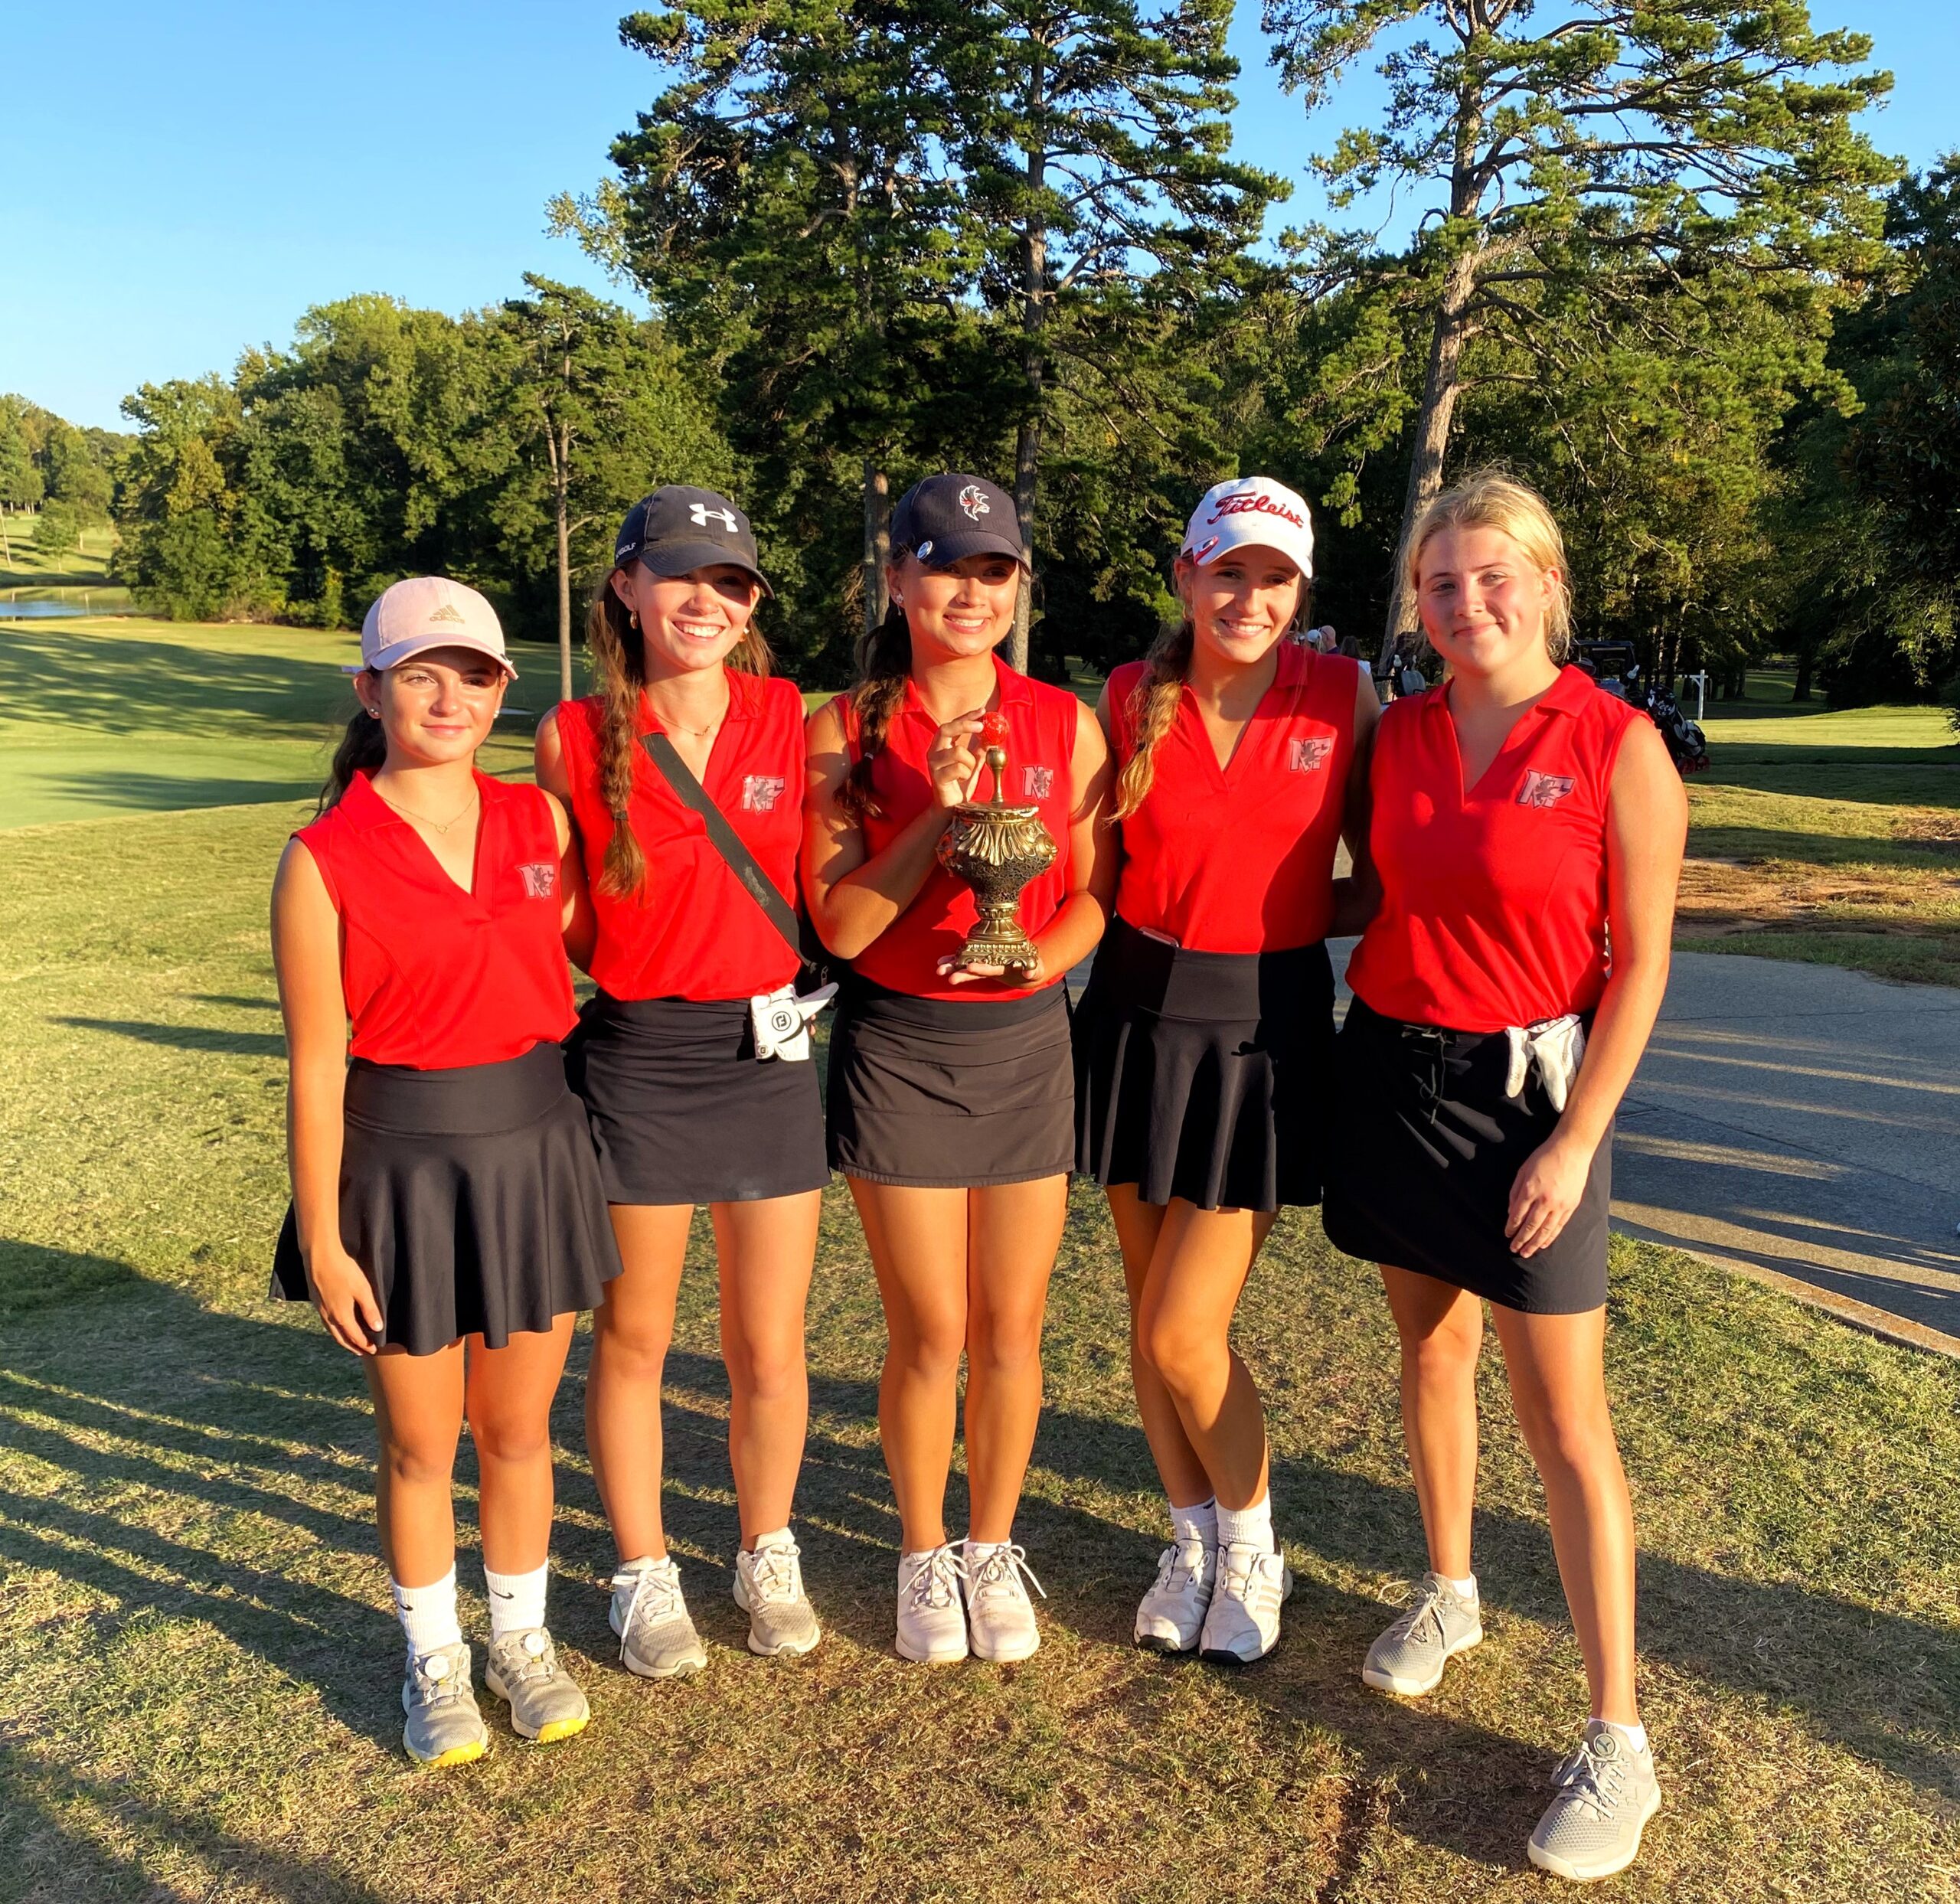 Nation Ford golfers win Milltown Showdown on the links (Oct. 2 Roundup)